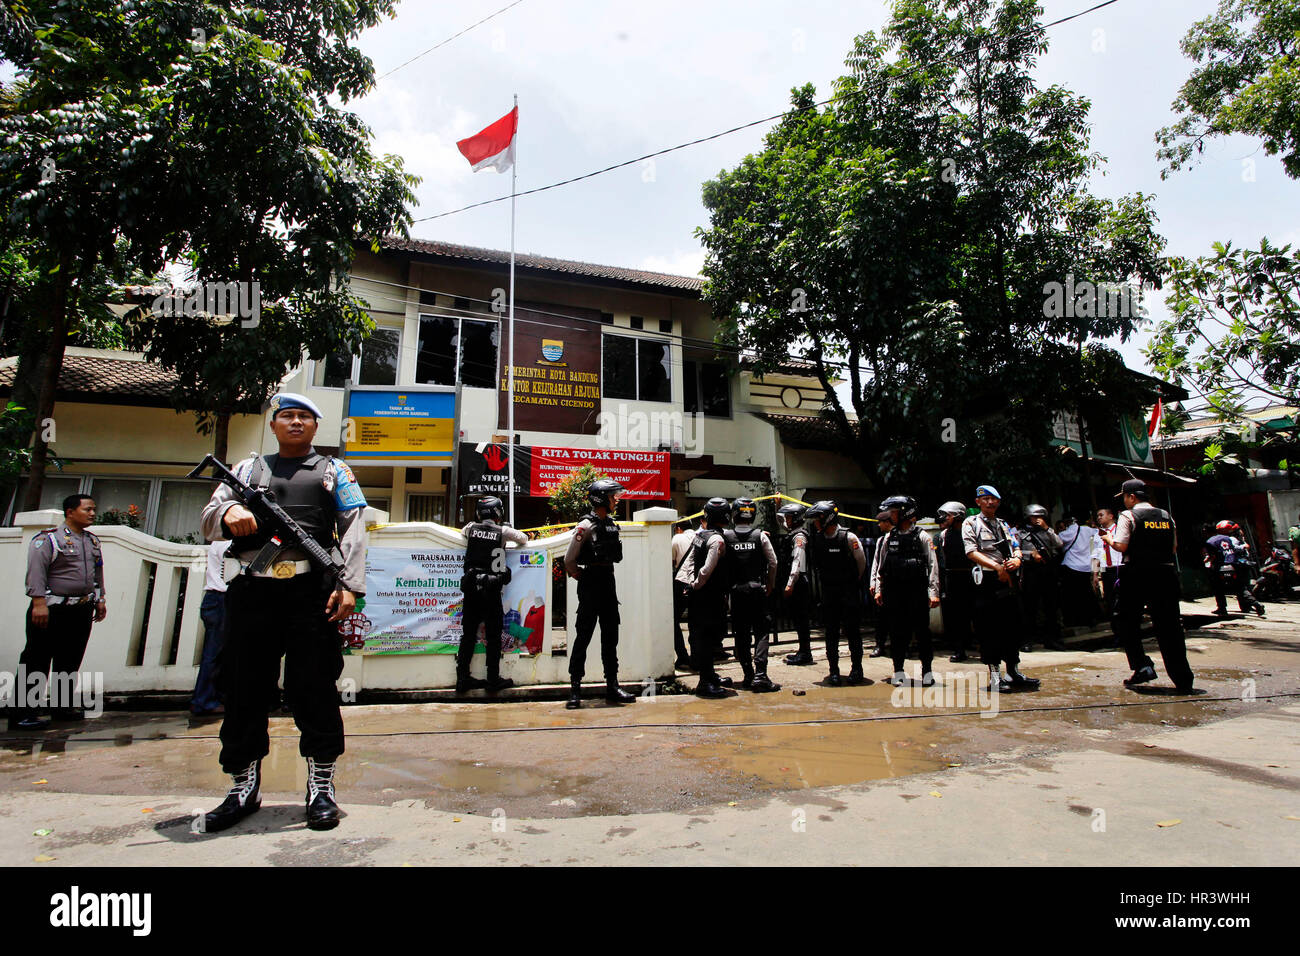 (170227) -- BANDUNG (INDONESIA), Feb. 27, 2017 (Xinhua) -- Indonesian anti-terrorist police squads stand guard at the site of a bomb attack in Bandung, West Java, Indonesia, Feb. 27, 2017. An Indonesian anti-terror squad on Monday arrested a terrorist after he set off a bomb and burned an office building in the capital city of West Java province, local police chief said. (Xinhua/Banyu Biru) (zjy) Stock Photo